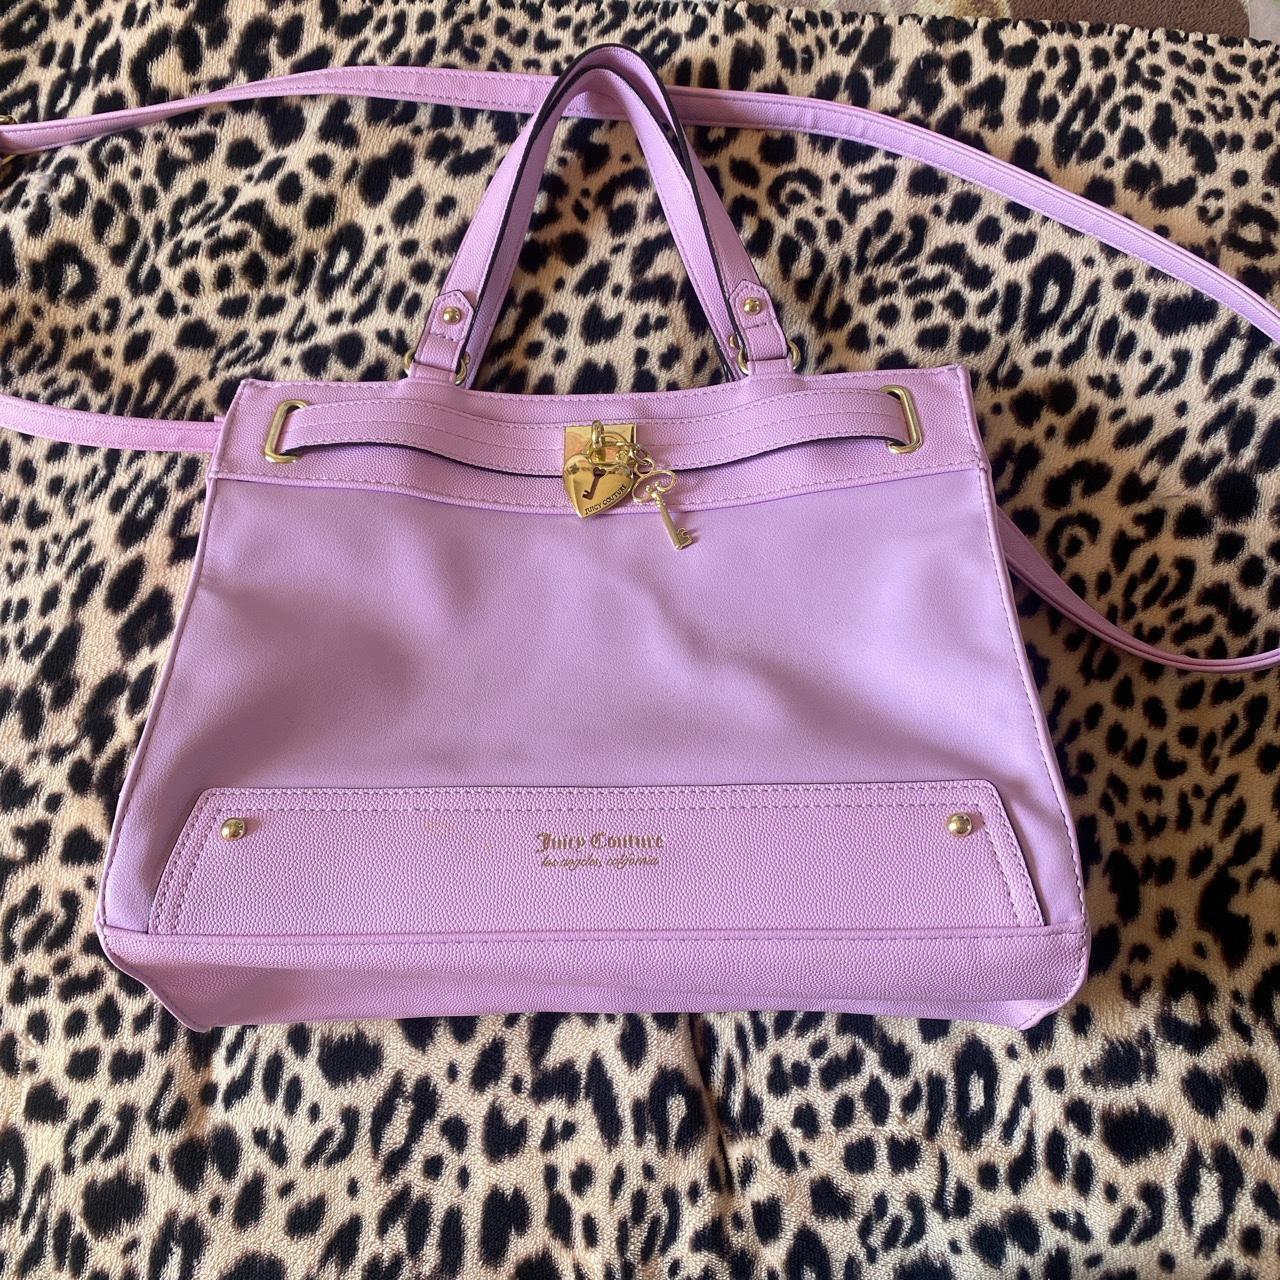 JUICY COUTURE Purple Leather Crossbody Bag With Flap Tunnel. | eBay